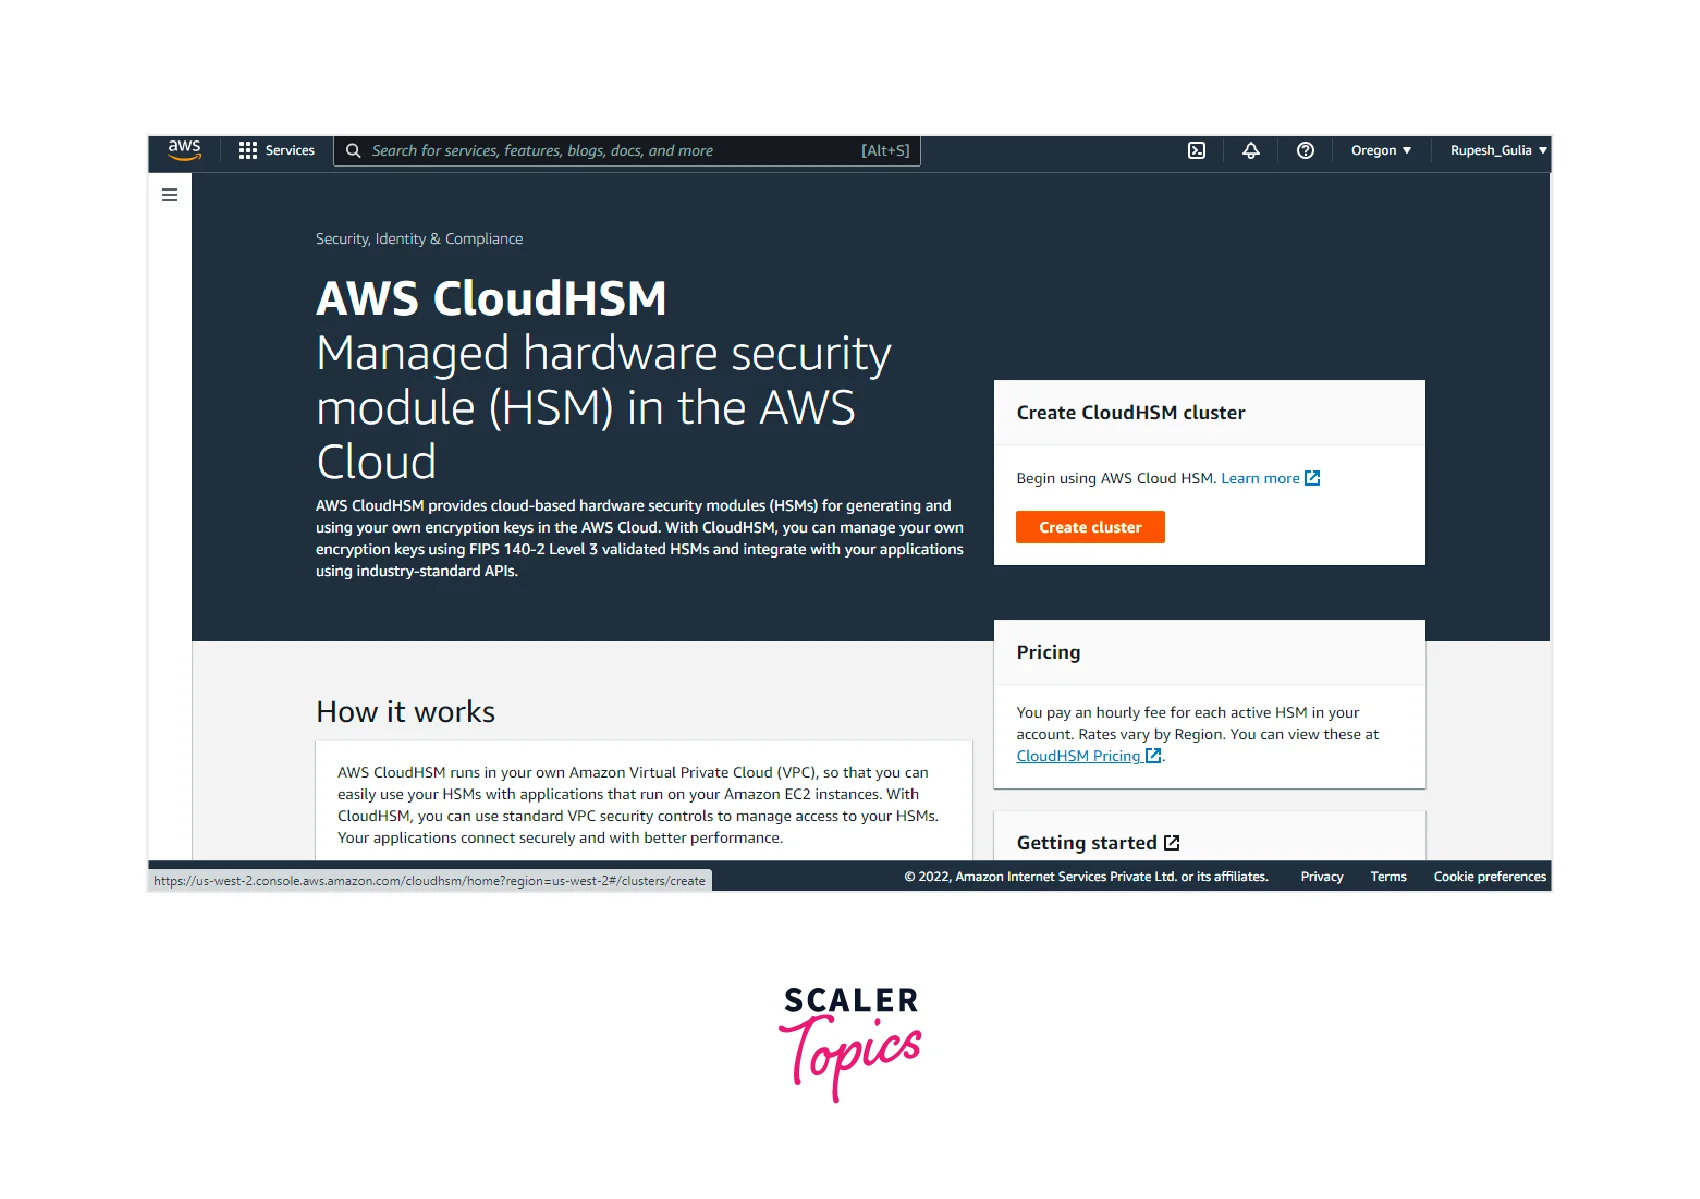 aws cloudhsm from aws management console